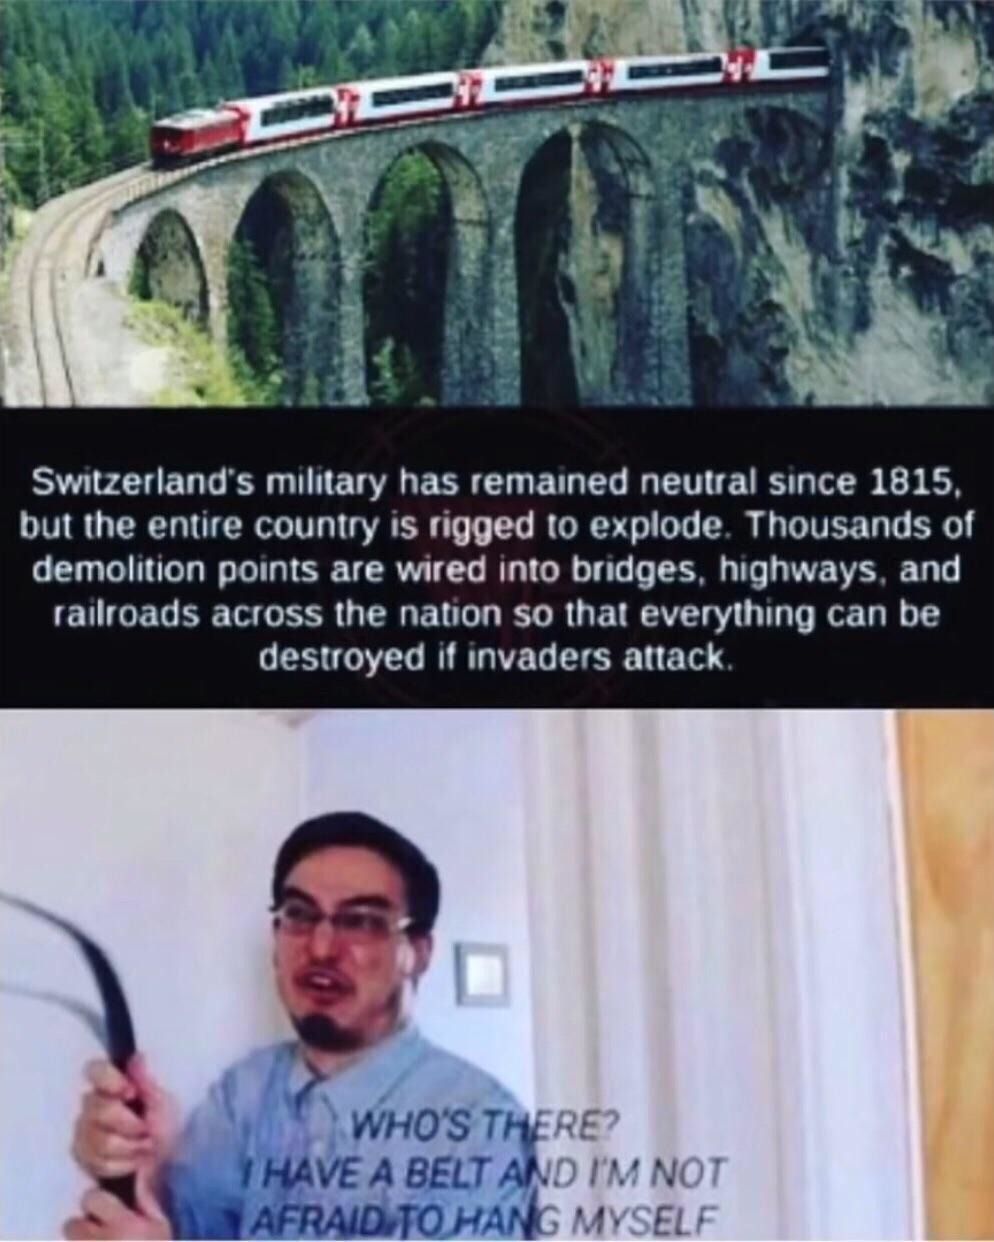 G
Switzerland's military has remained neutral since 1815,
but the entire country is rigged to explode. Thousands of
demolition points are wired into bridges, highways, and
railroads across the nation so that everything can be
destroyed if invaders attack.
0
WHO'S THERE?
I HAVE A BELT AND I'M NOT
AFRAID TO HANG MYSELF